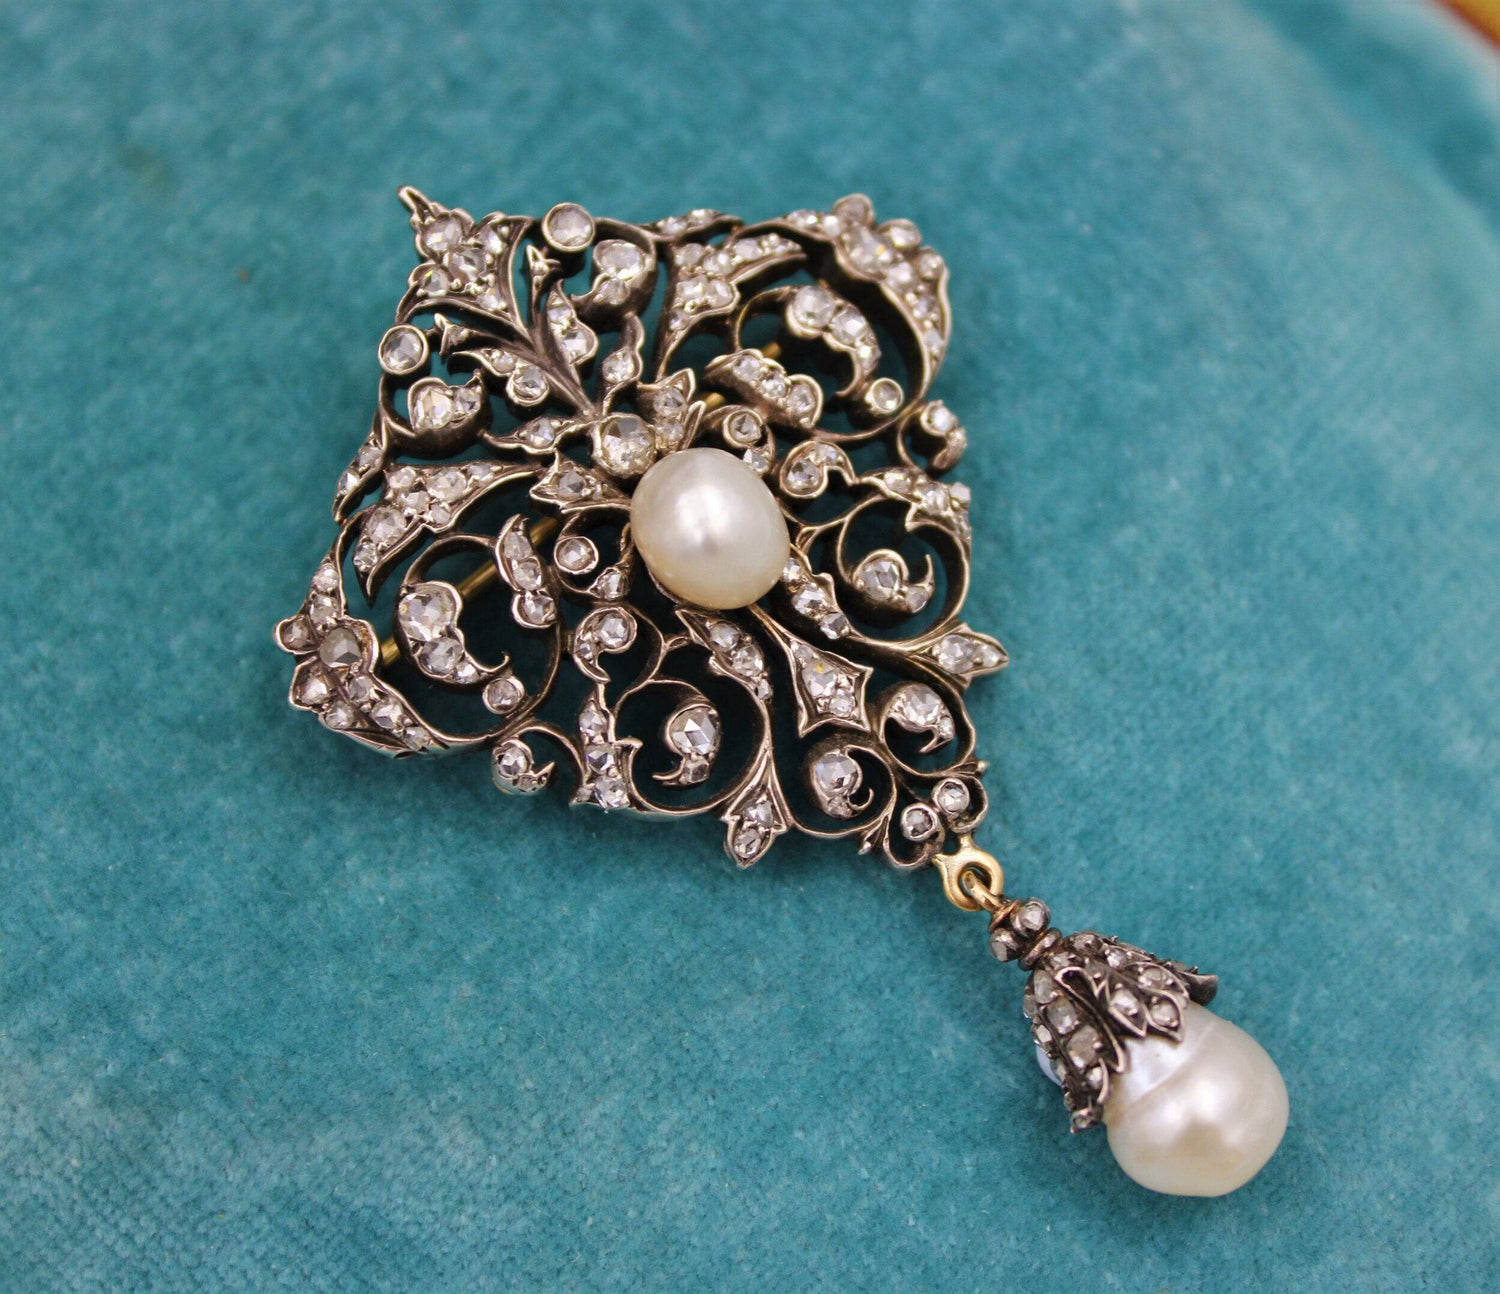 An exceptionally finely worked Natural Pearl & Diamond Brooch/Pendant set in 18ct Yellow Gold & Silver, French, Circa 1870 - Robin Haydock Antiques